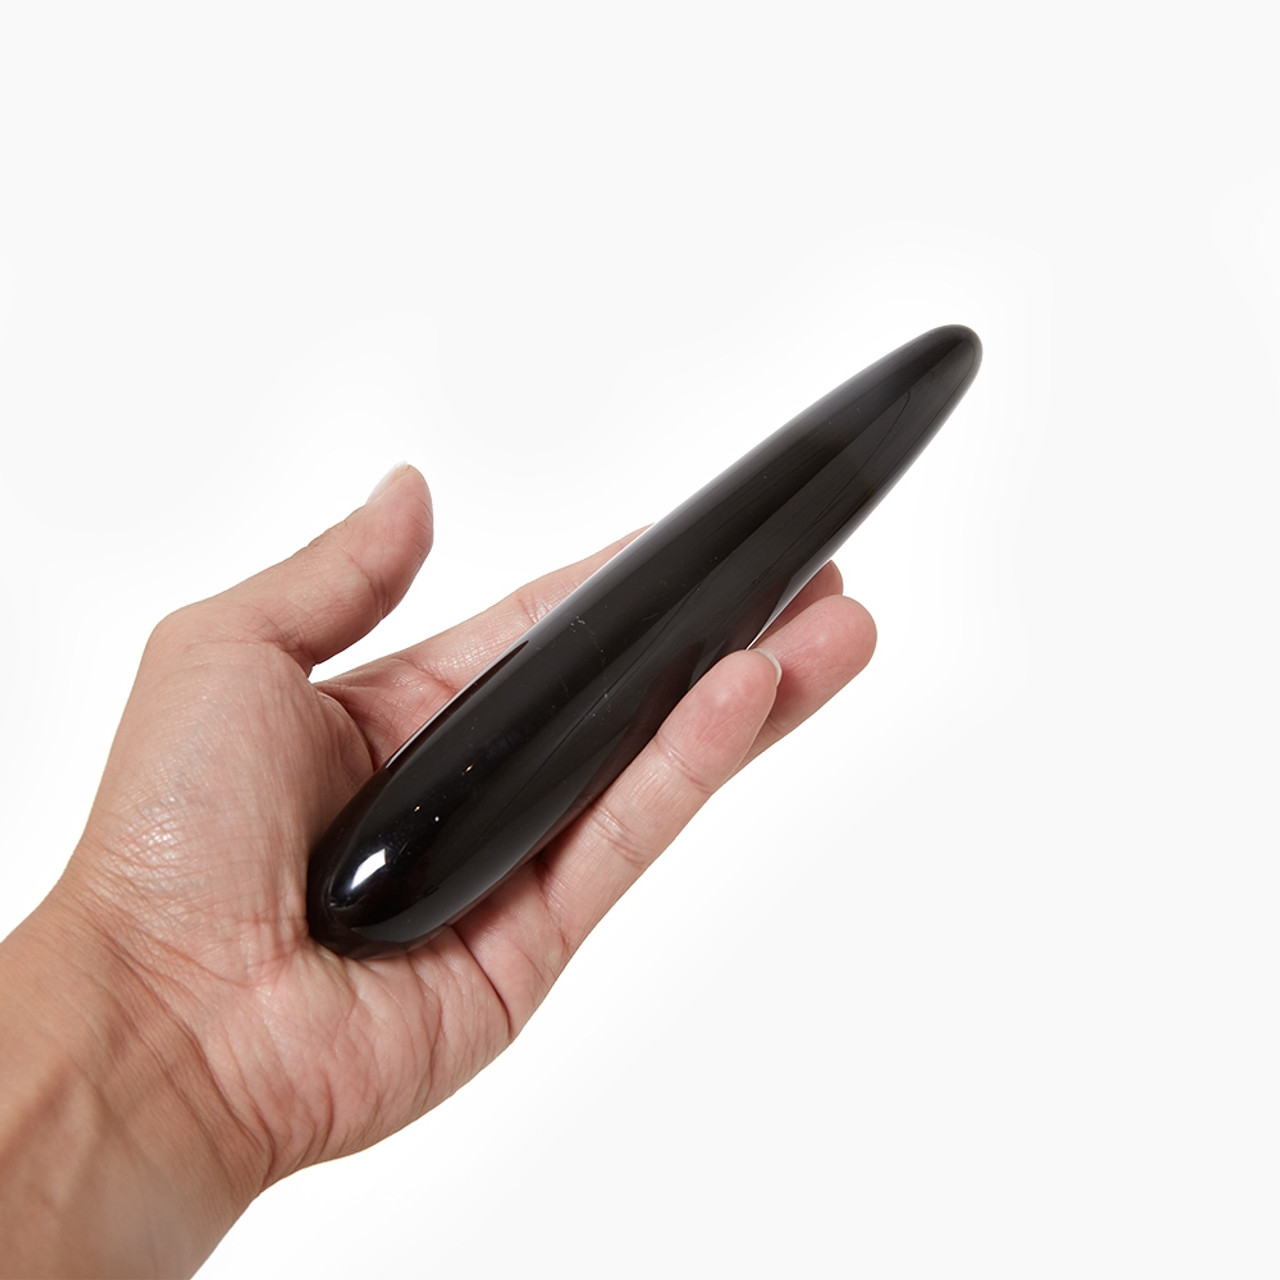 The Xaga Slim Crystal Dildo held in a hand